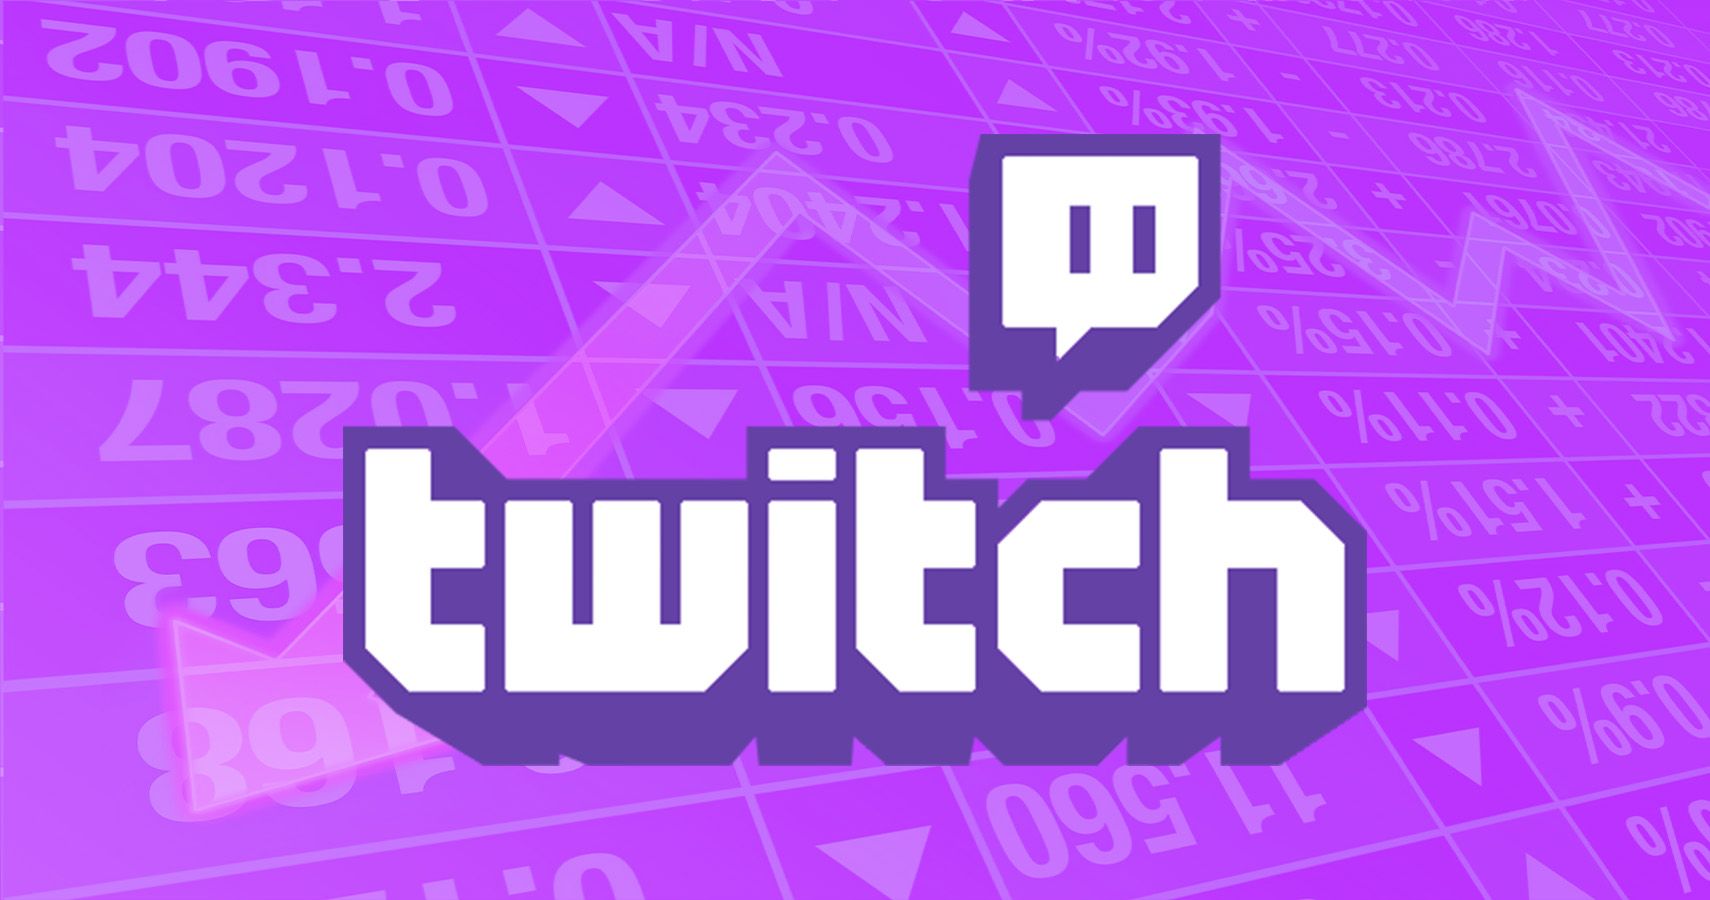 Twitch logo overlaid on the 